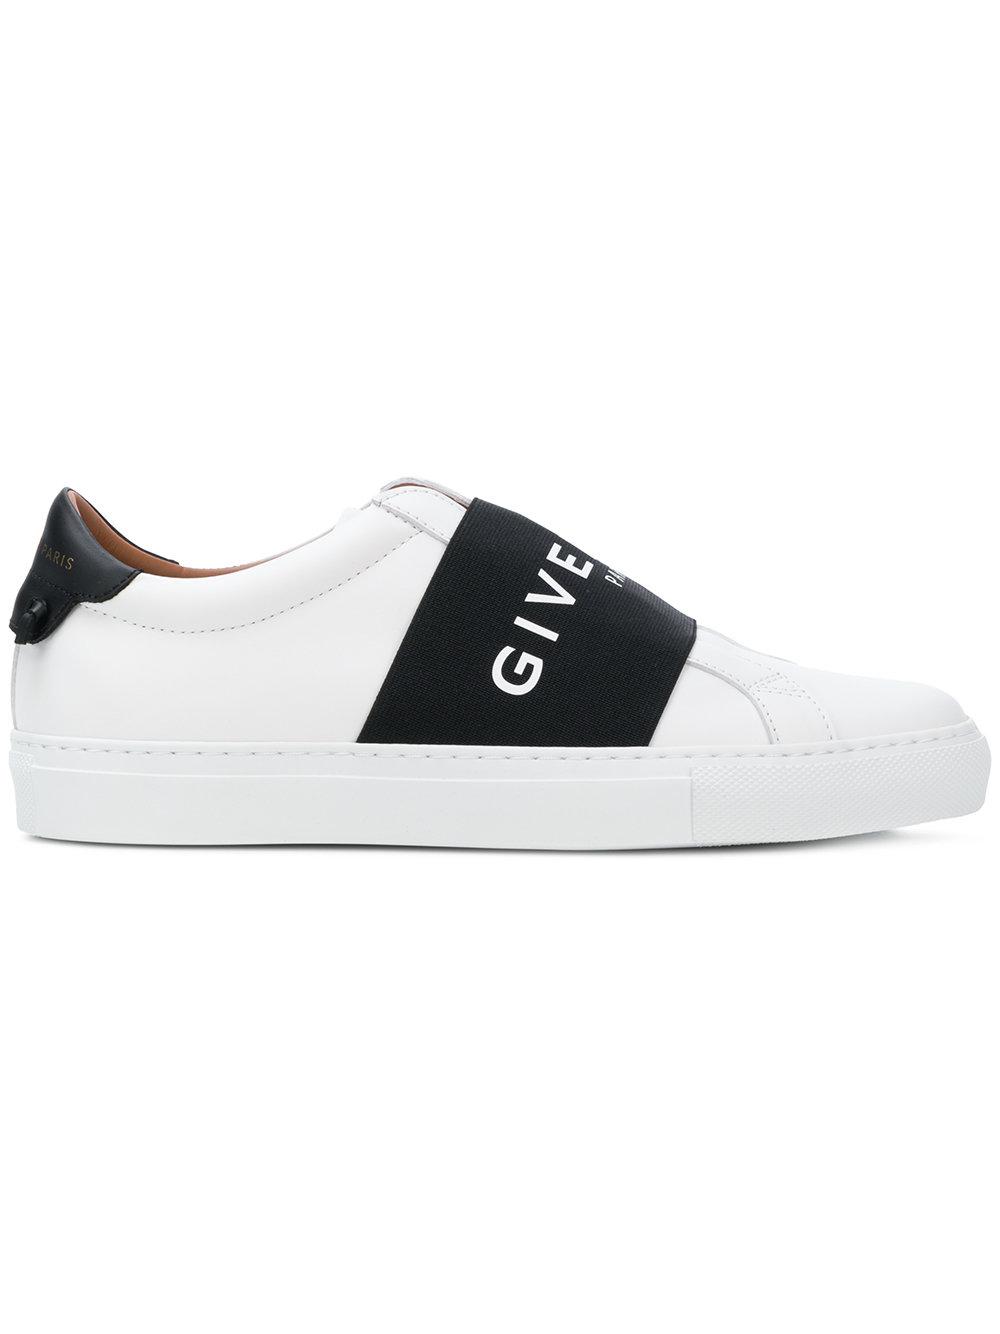 Givenchy Leather Logo Strap Sneakers in 